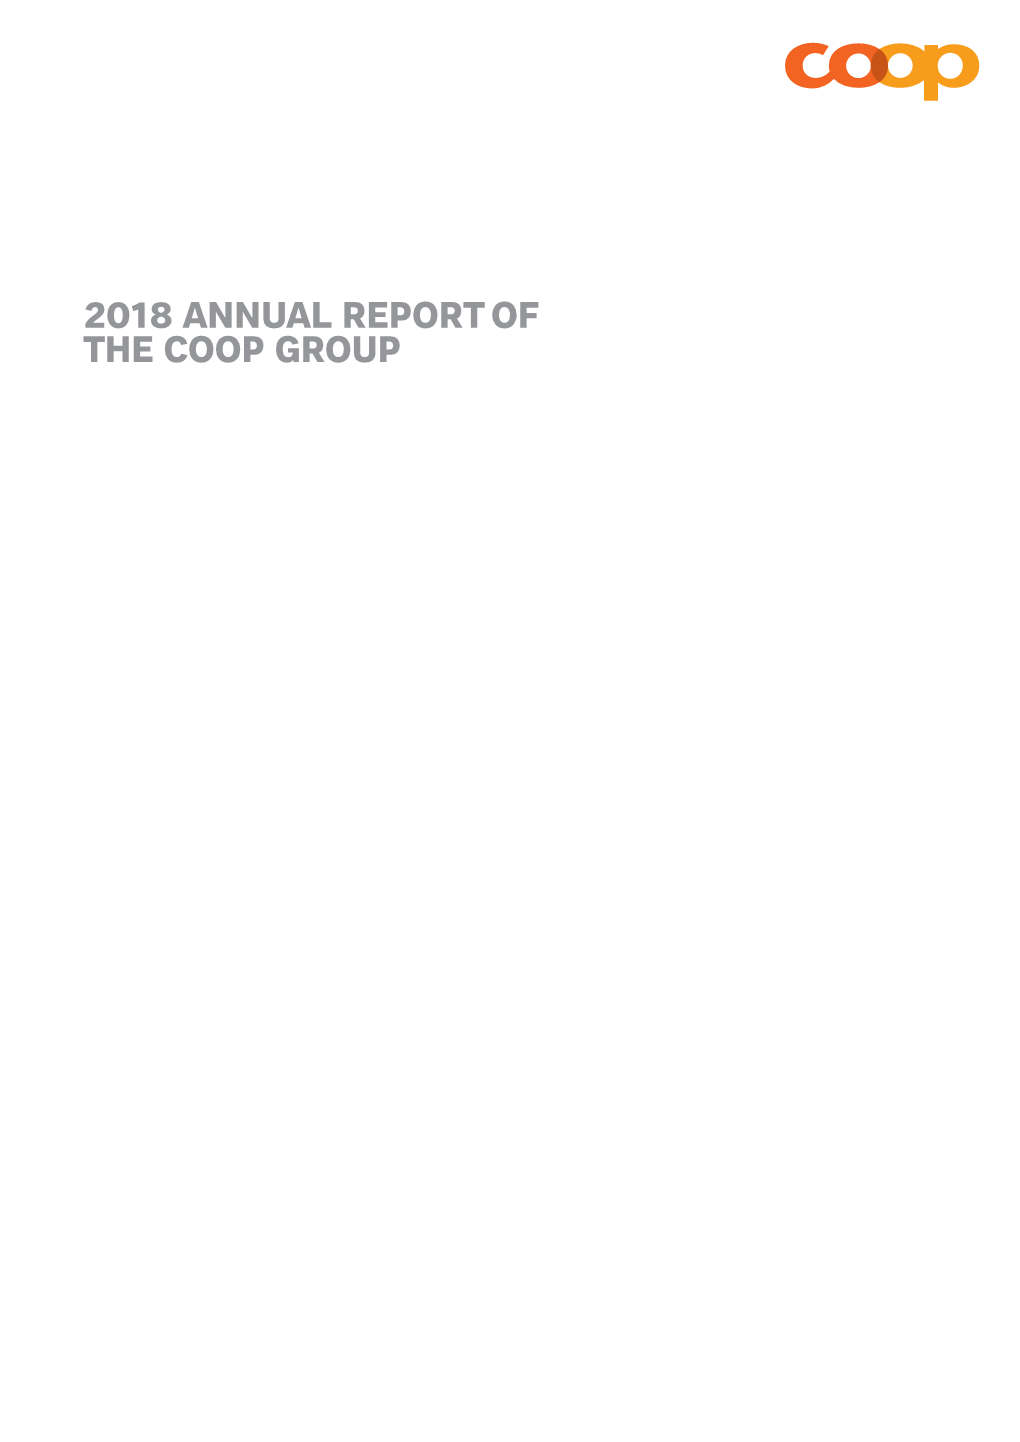 2018 Annual Report of the Coop Group